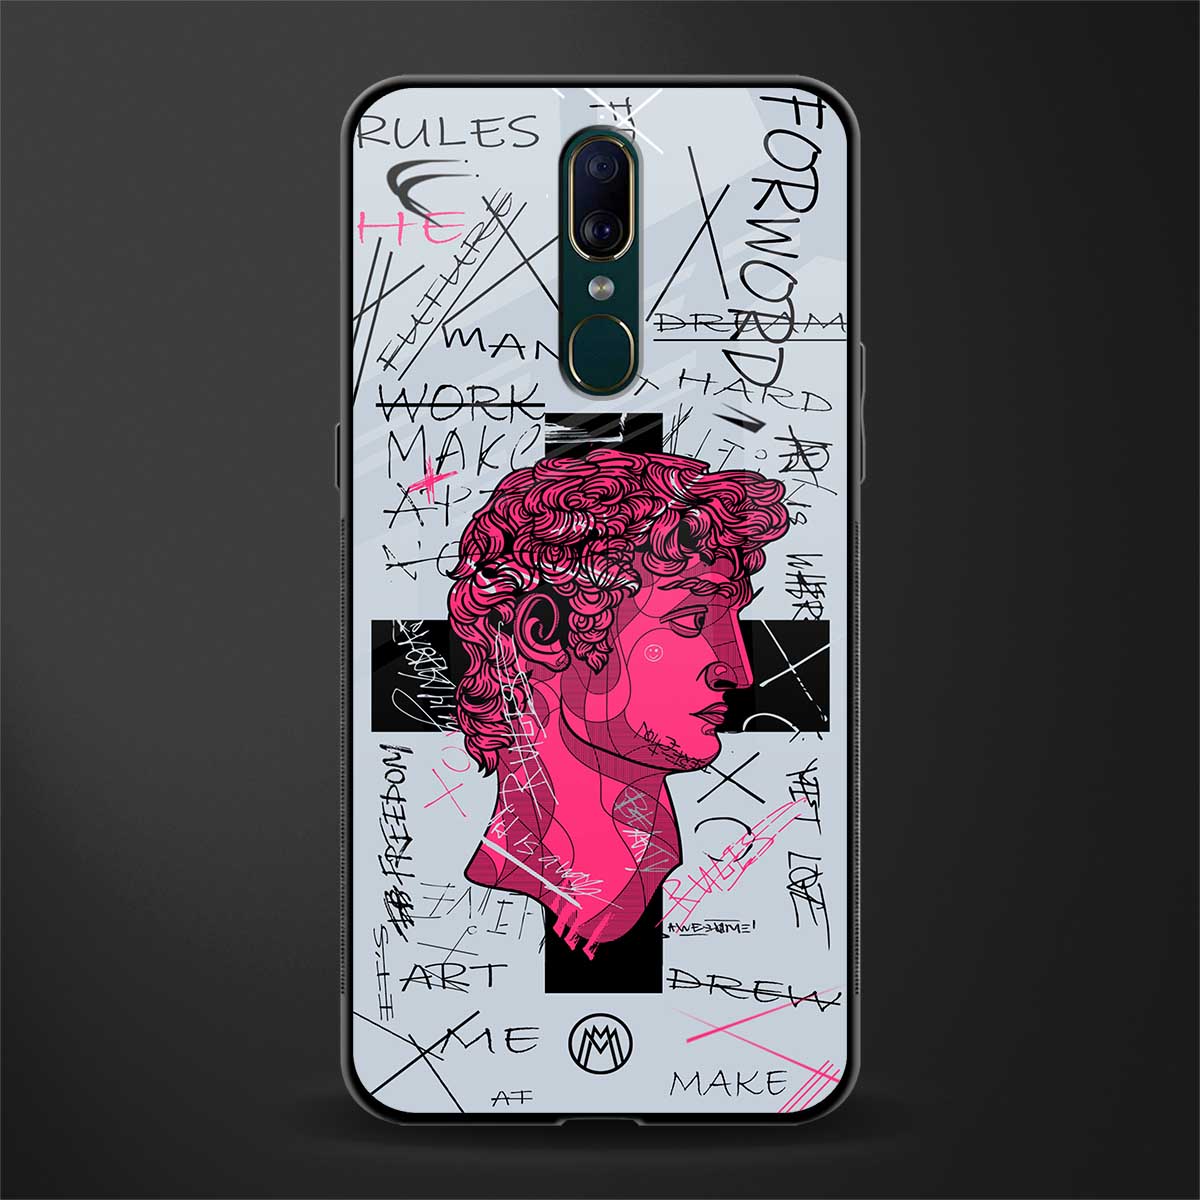 lost in reality david glass case for oppo a9 image